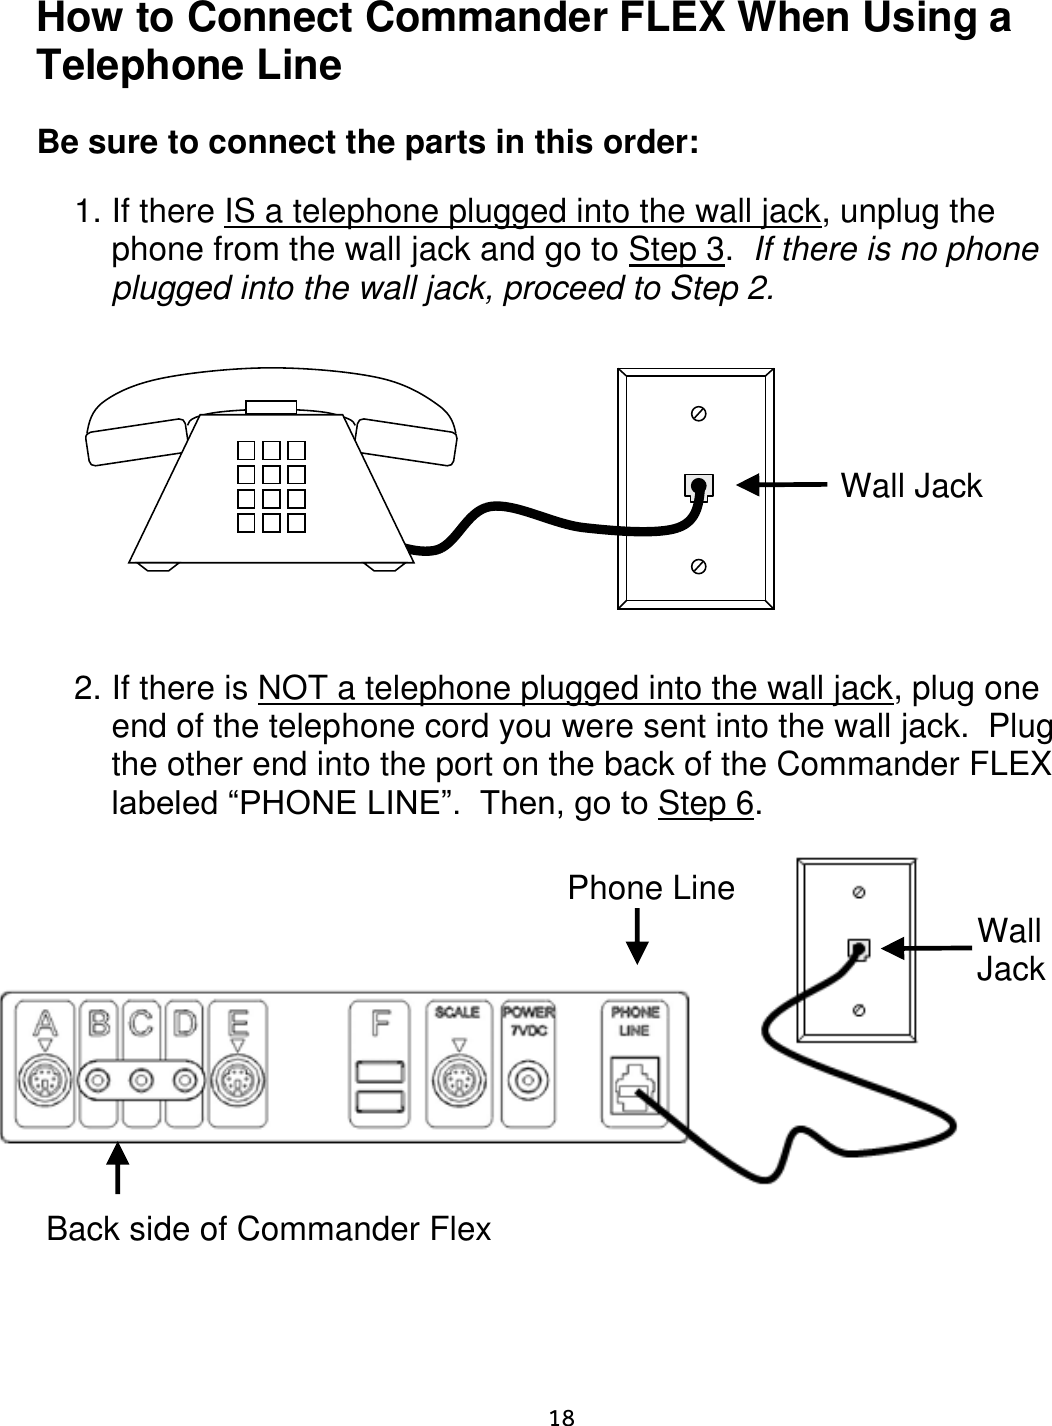     18  How to Connect Commander FLEX When Using a Telephone Line  Be sure to connect the parts in this order:  1. If there IS a telephone plugged into the wall jack, unplug the phone from the wall jack and go to Step 3.  If there is no phone plugged into the wall jack, proceed to Step 2.                      2. If there is NOT a telephone plugged into the wall jack, plug one end of the telephone cord you were sent into the wall jack.  Plug the other end into the port on the back of the Commander FLEX labeled “PHONE LINE”.  Then, go to Step 6.                                Wall Jack Wall  Jack Phone Line Back side of Commander Flex   